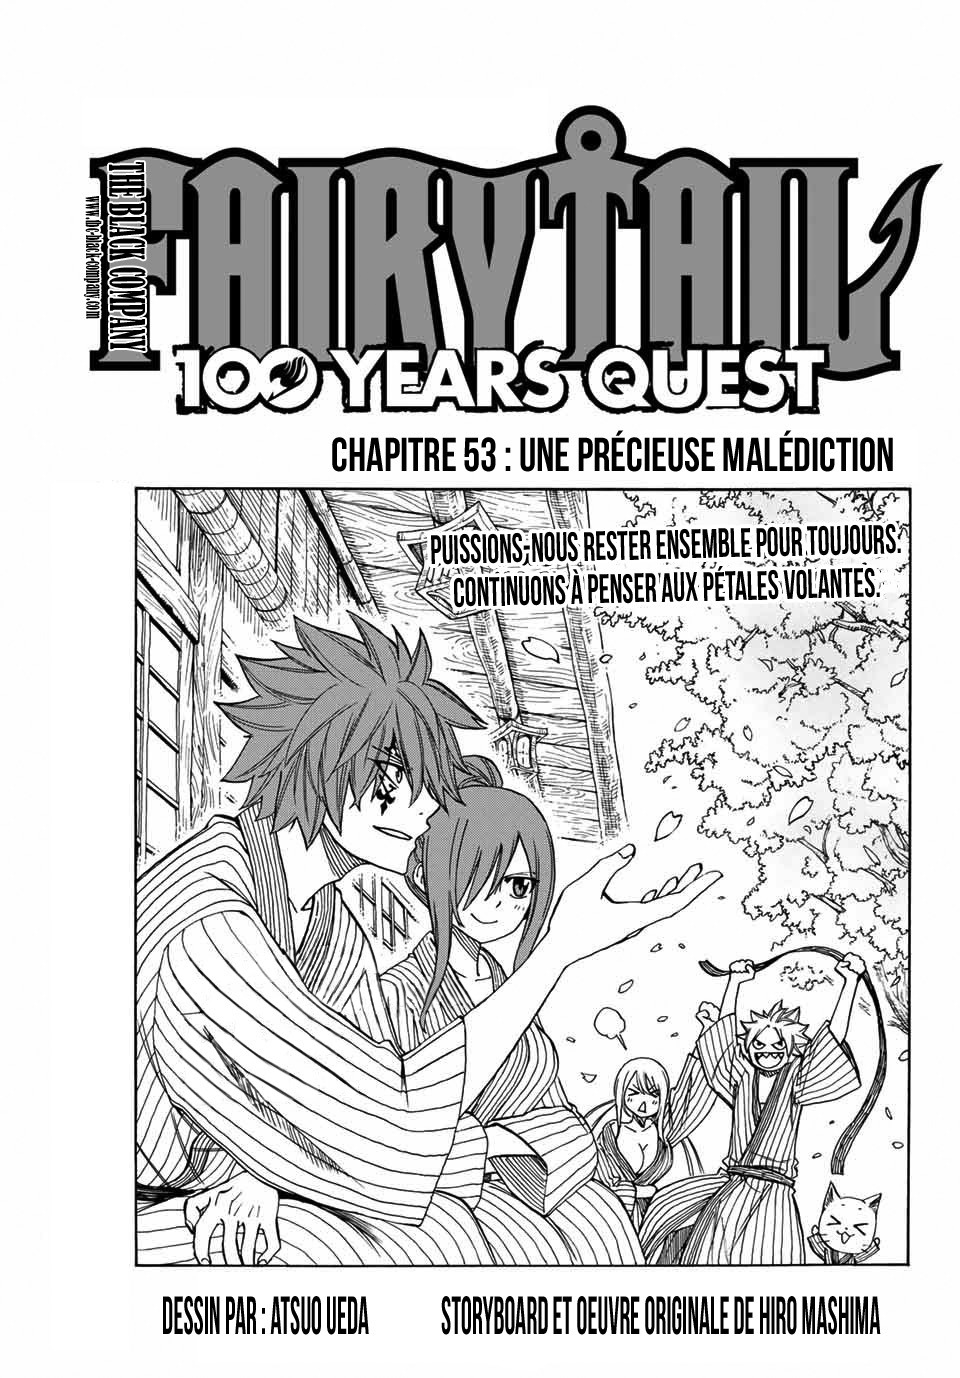 Fairy Tail 100 Years Quest: Chapter 53 - Page 1